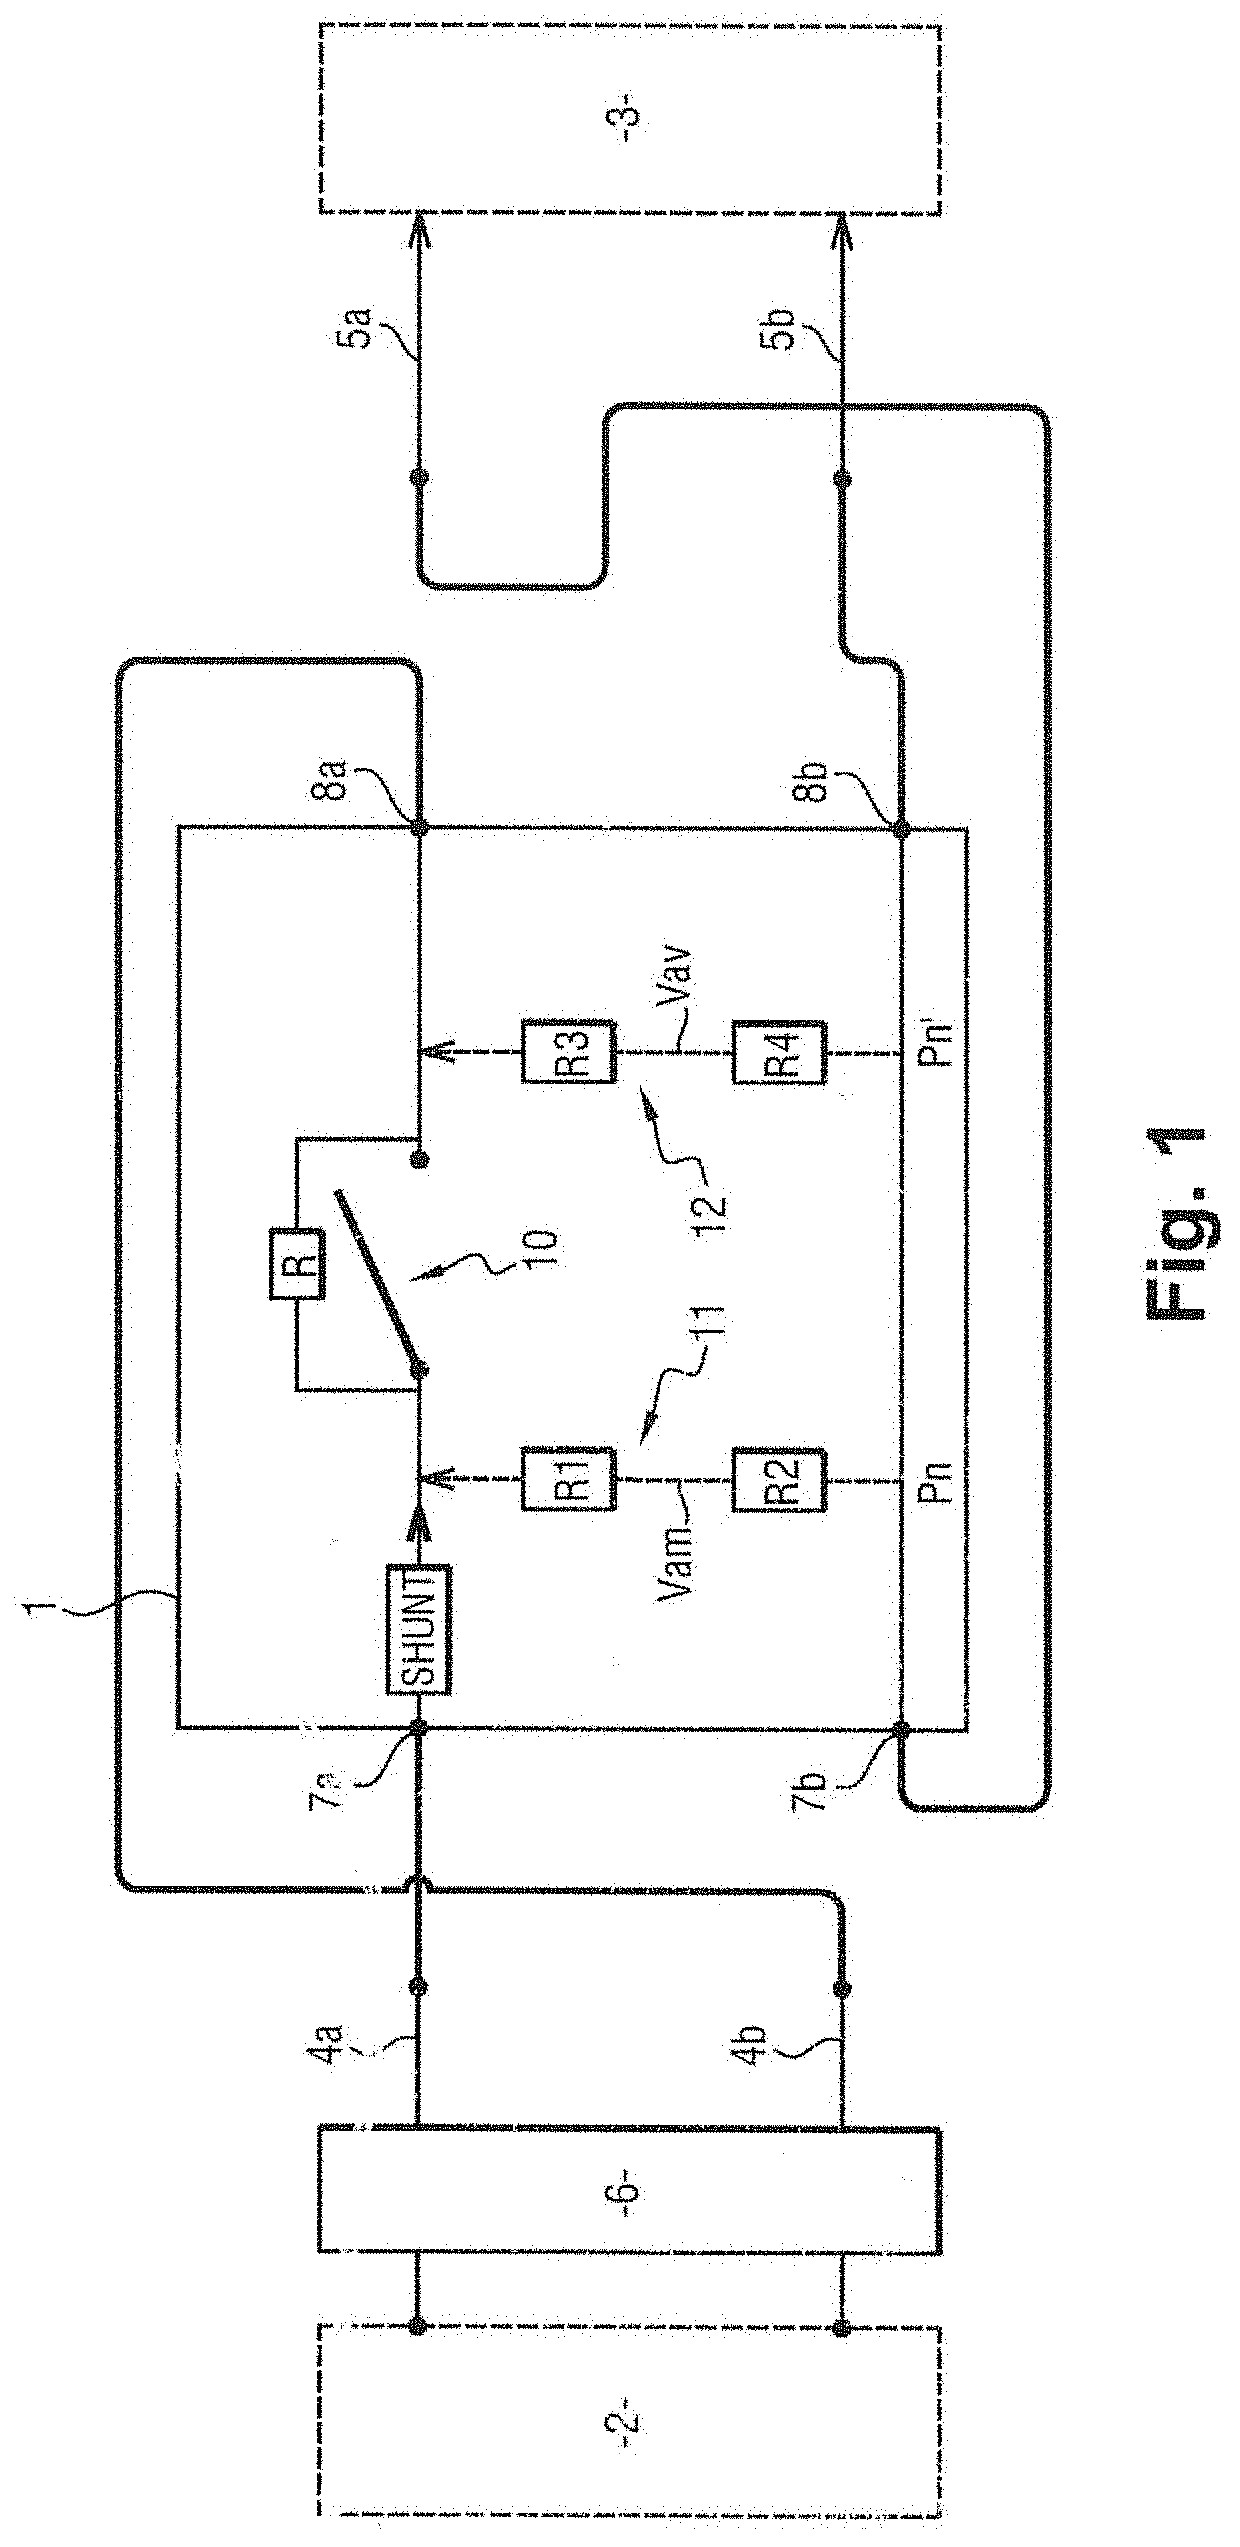 Method for verifying the wiring of a meter